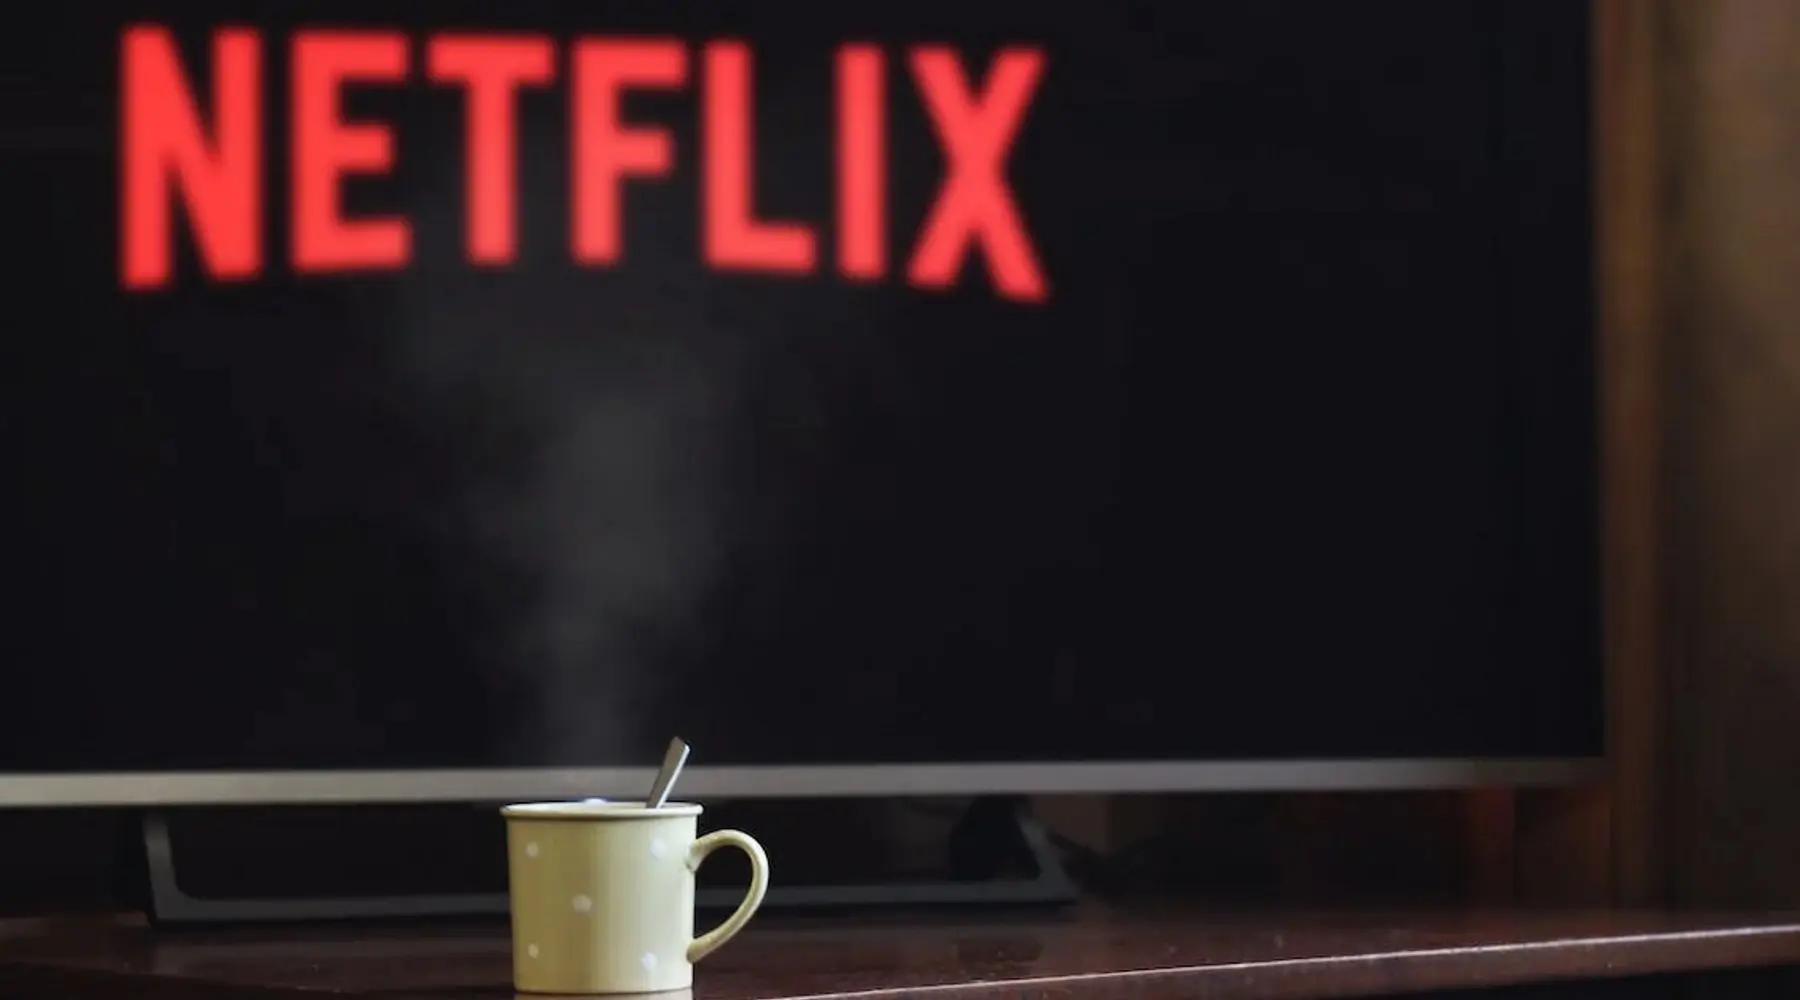 Cheaper Netflix with ads is now available Is it worth